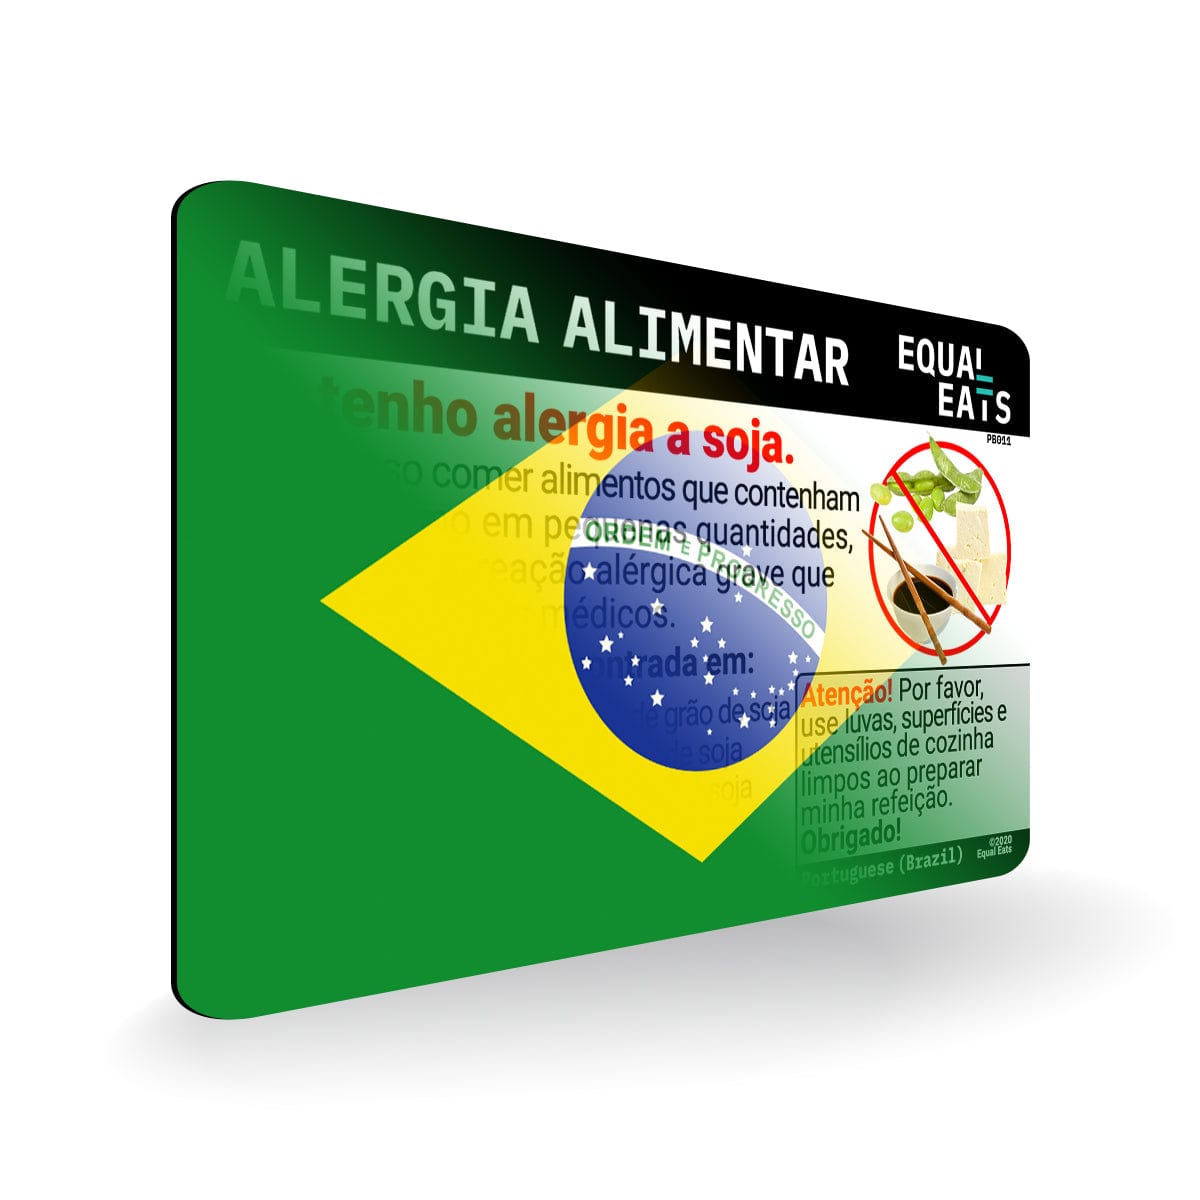 Soy Allergy in Portuguese. Soy Allergy Card for Brazil